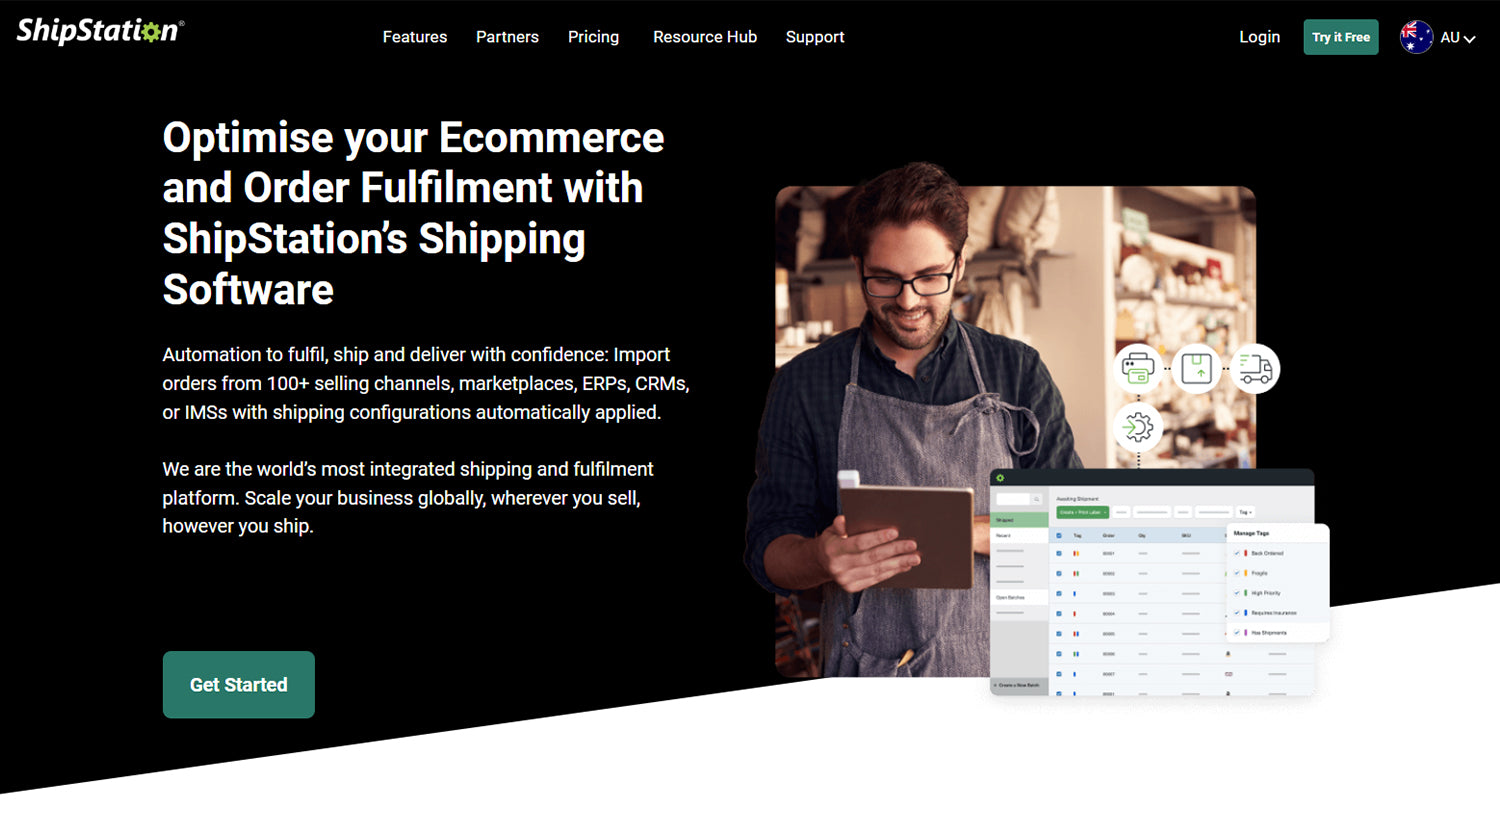 ShipStation is an online software that helps business owners manage order fulfilment more efficiently.